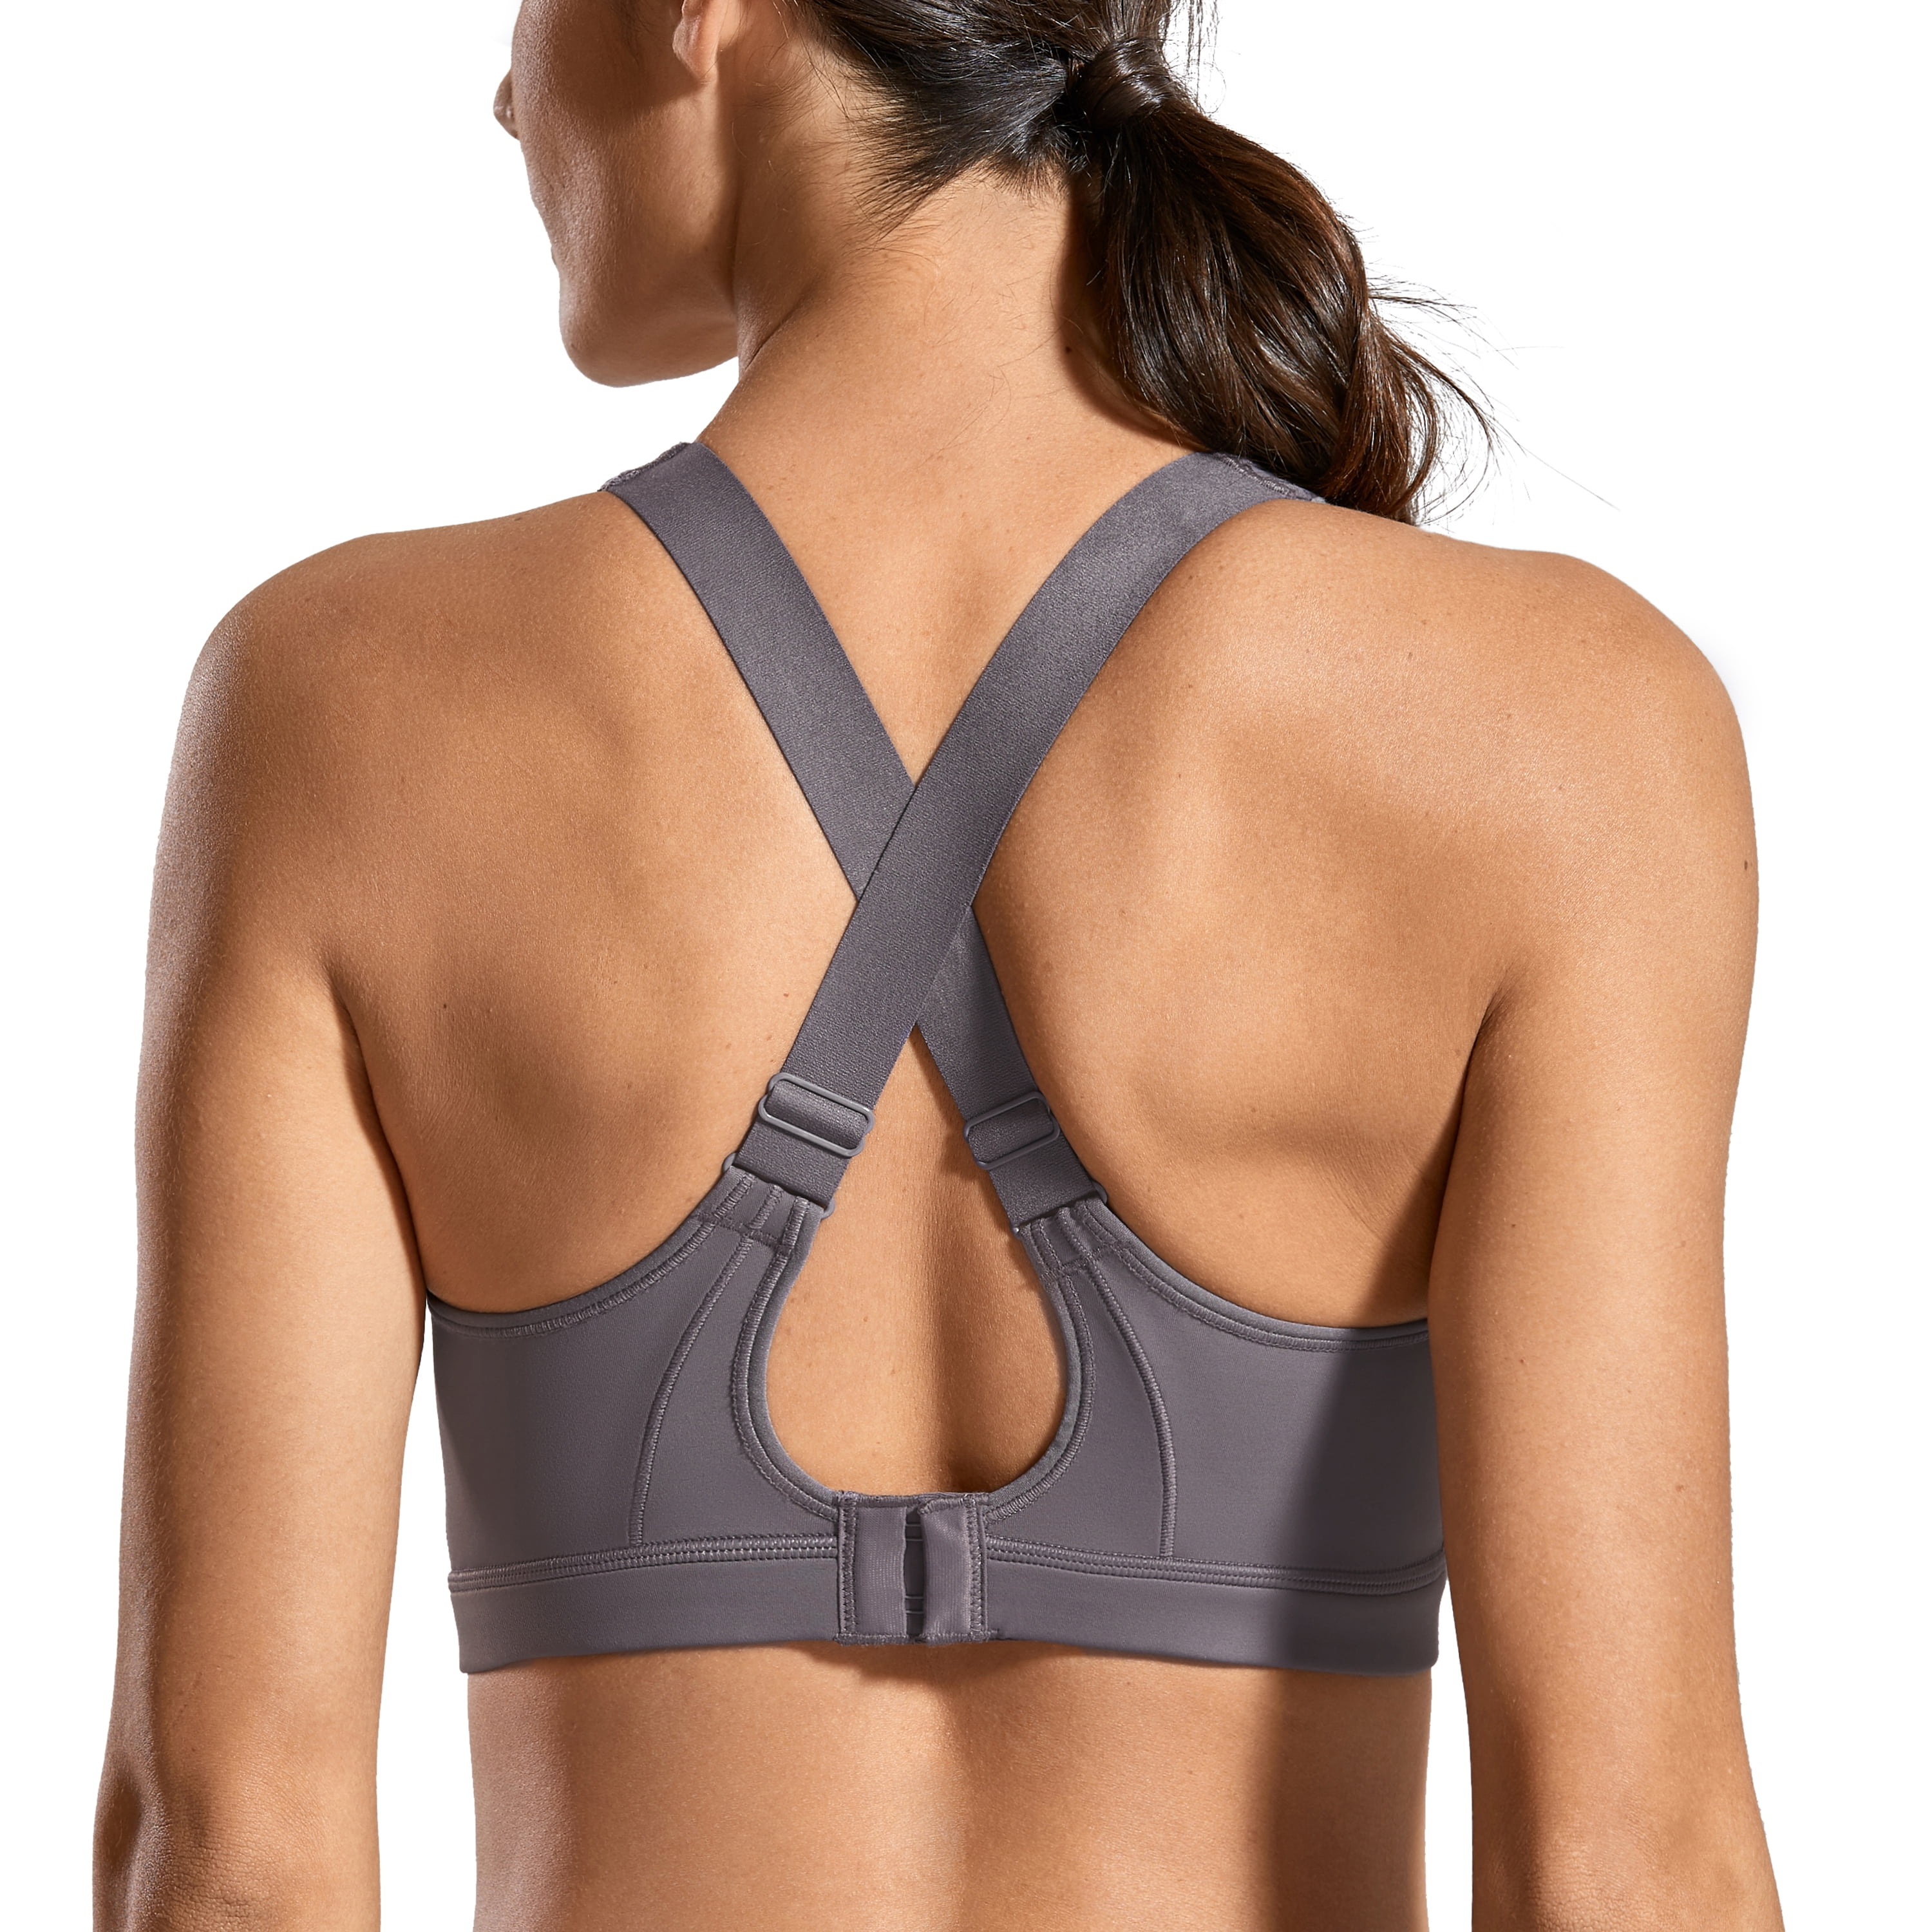 SYROKAN Womens High Impact Molded Cup Full Coverage Workout Sports Bra with Integrated Wire 